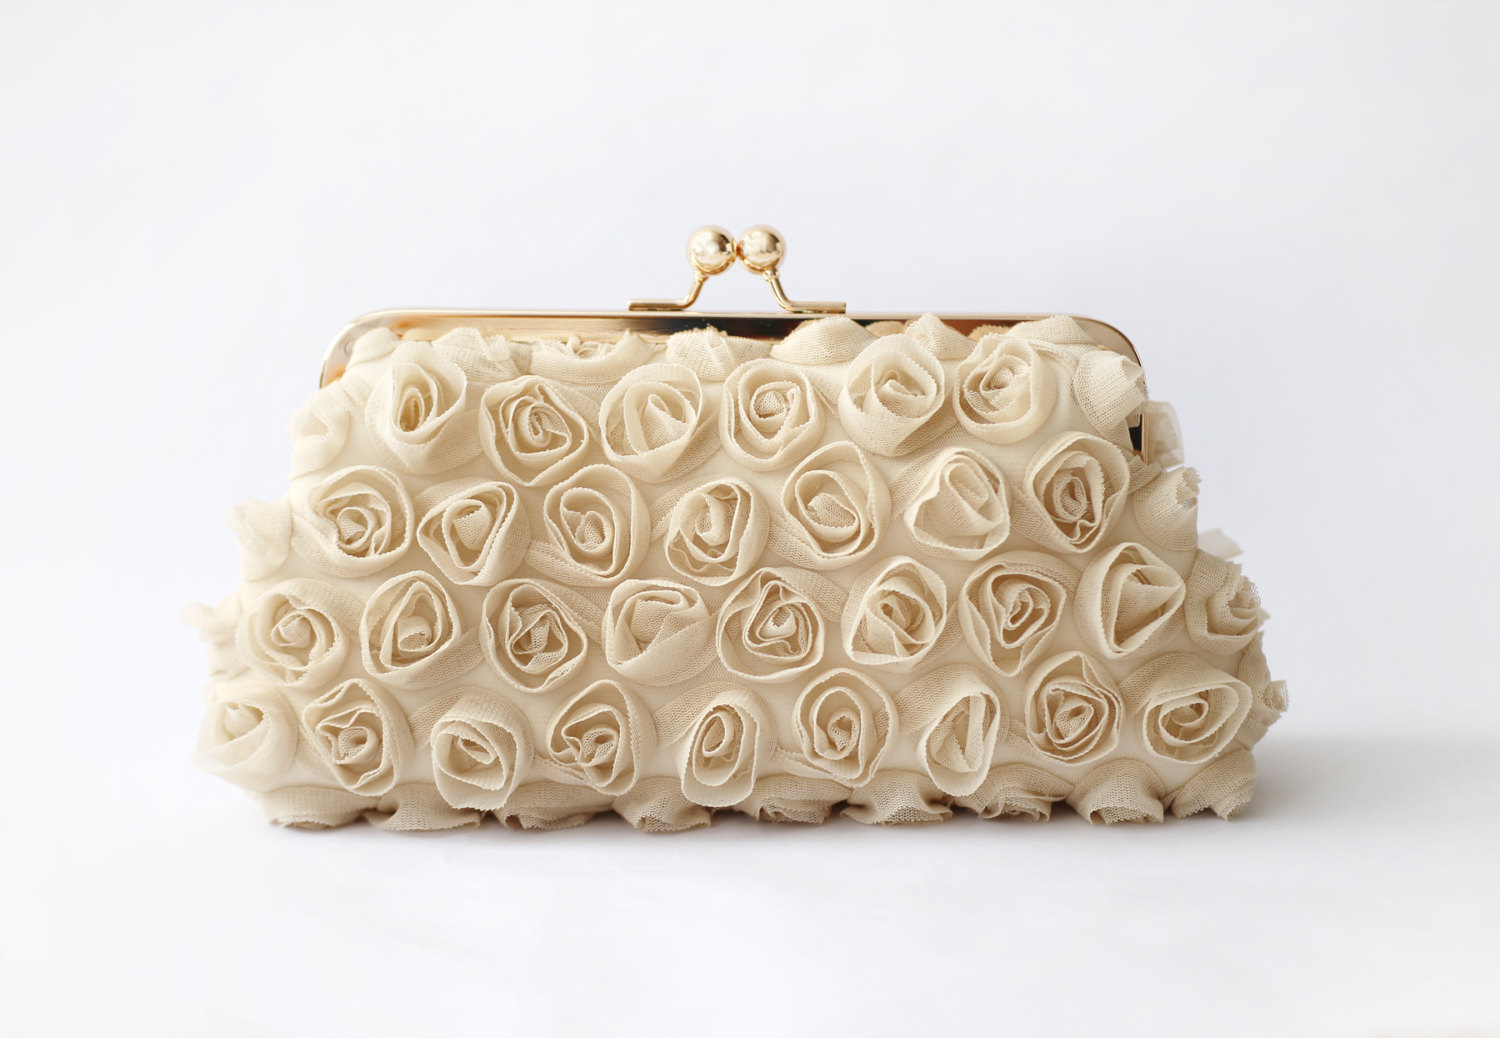 rosebuds rose inspired wedding ideas | flower bags clutches weddings by ANGEE W.